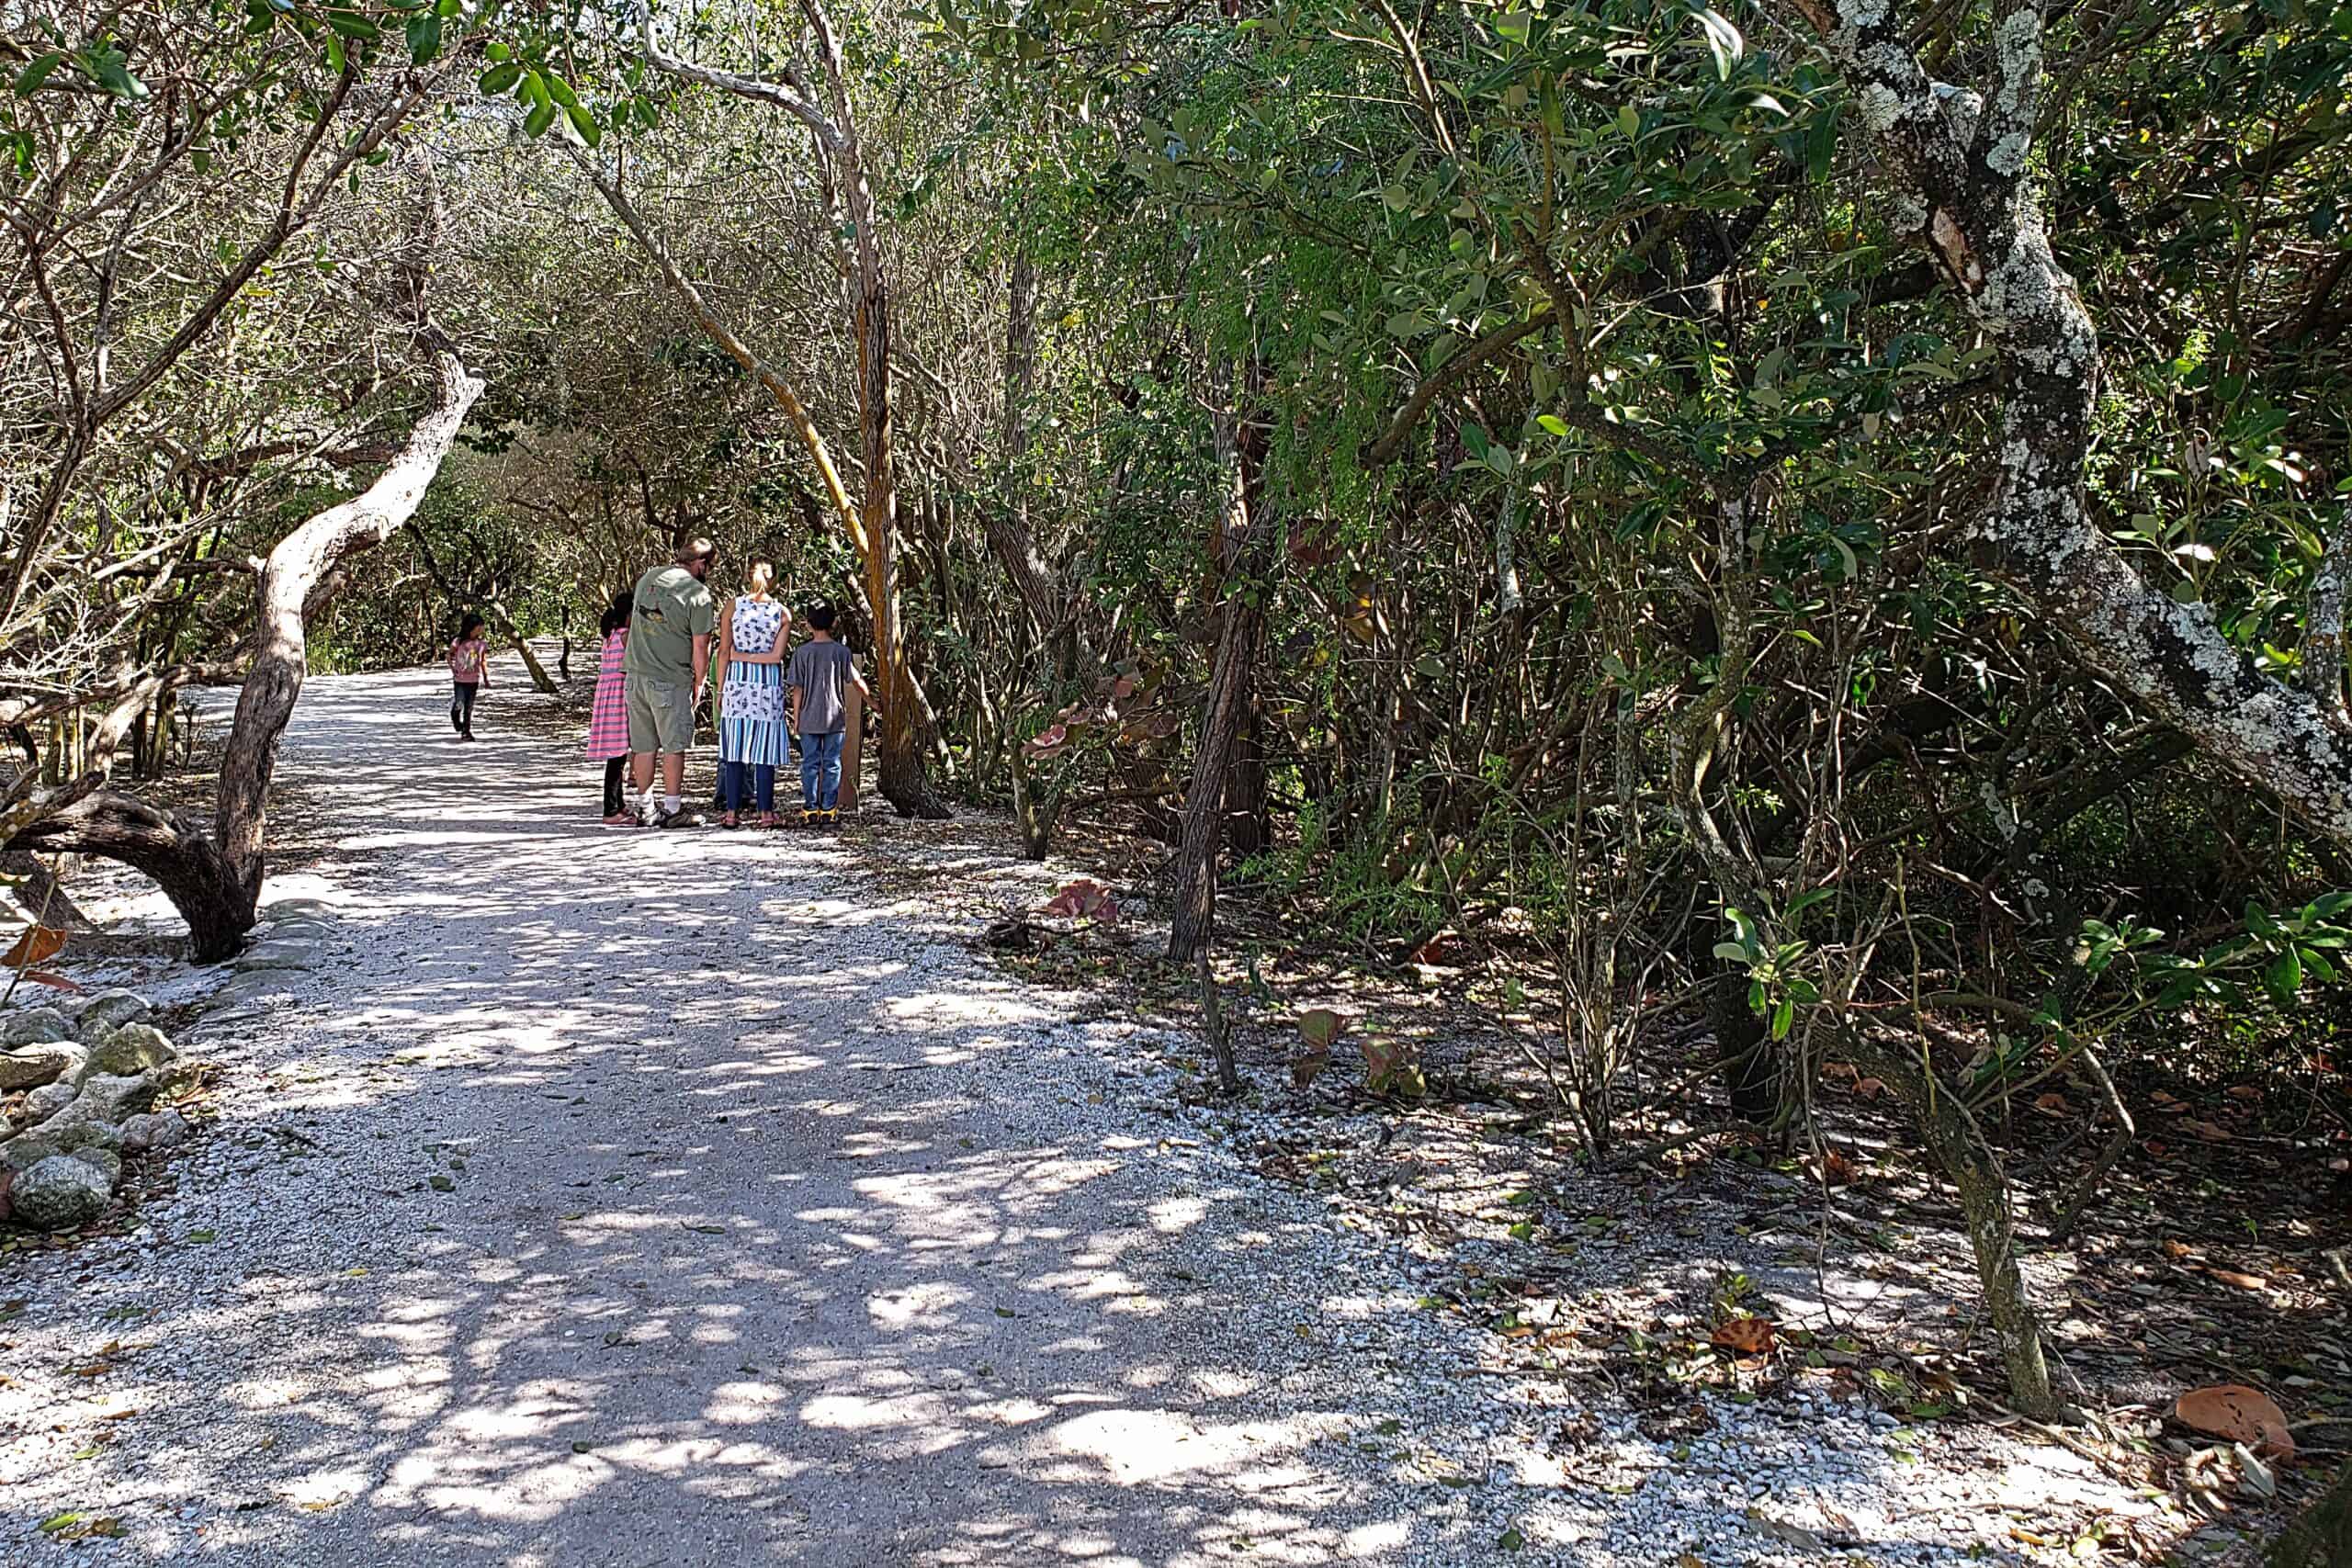 Hiking Mangroves: Can You Walk in a Mangrove Forest?